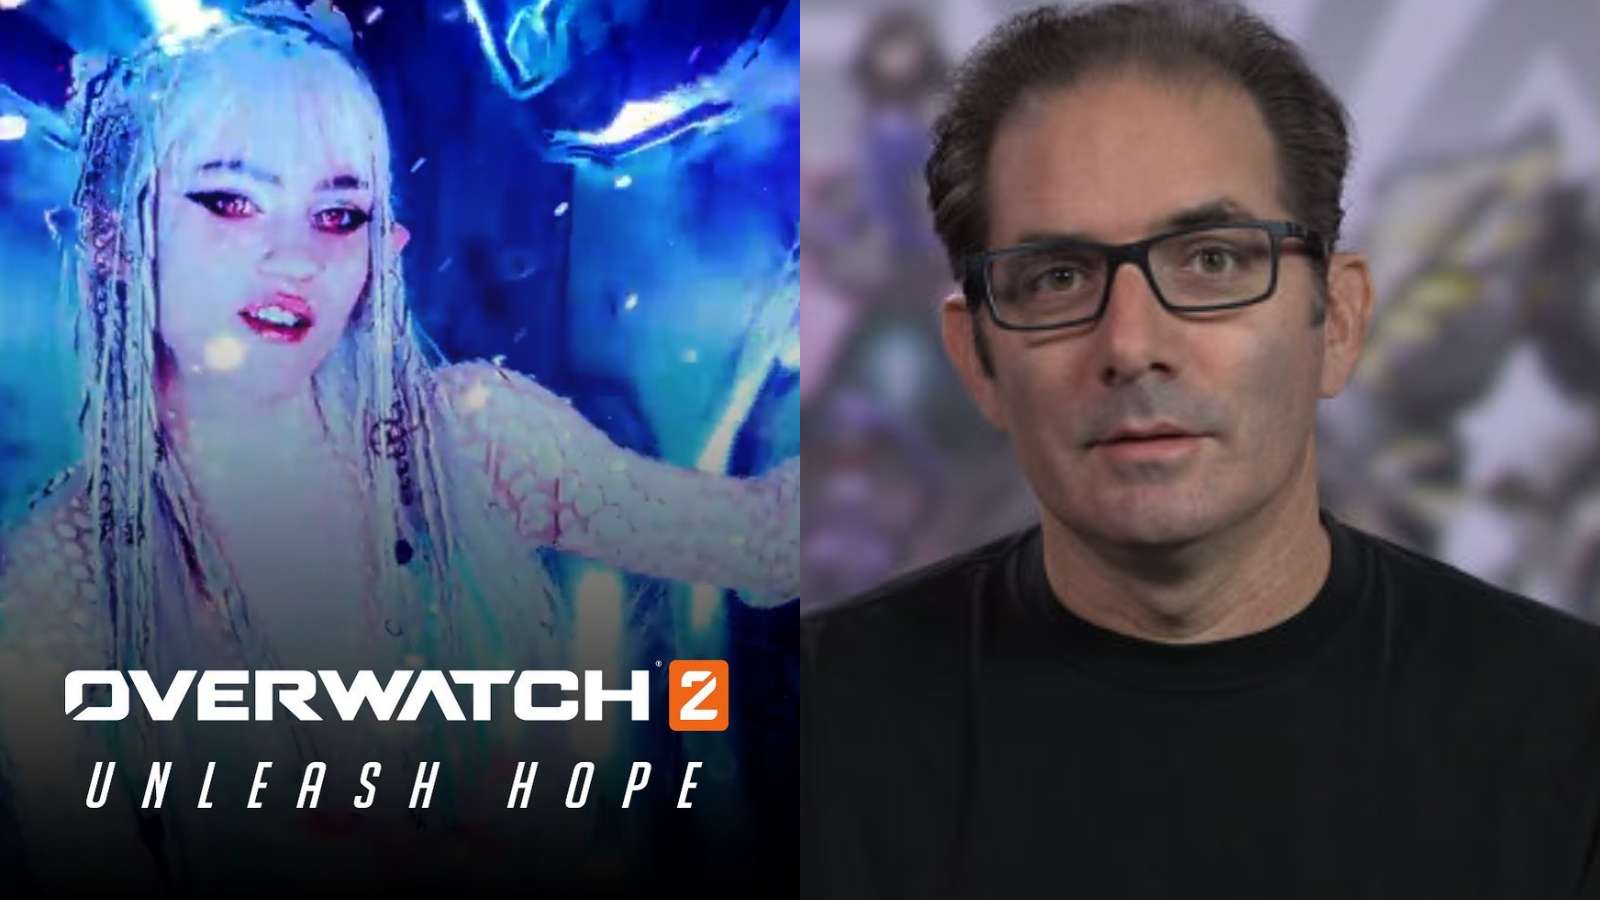 Grimes with jeff kaplan in ow2